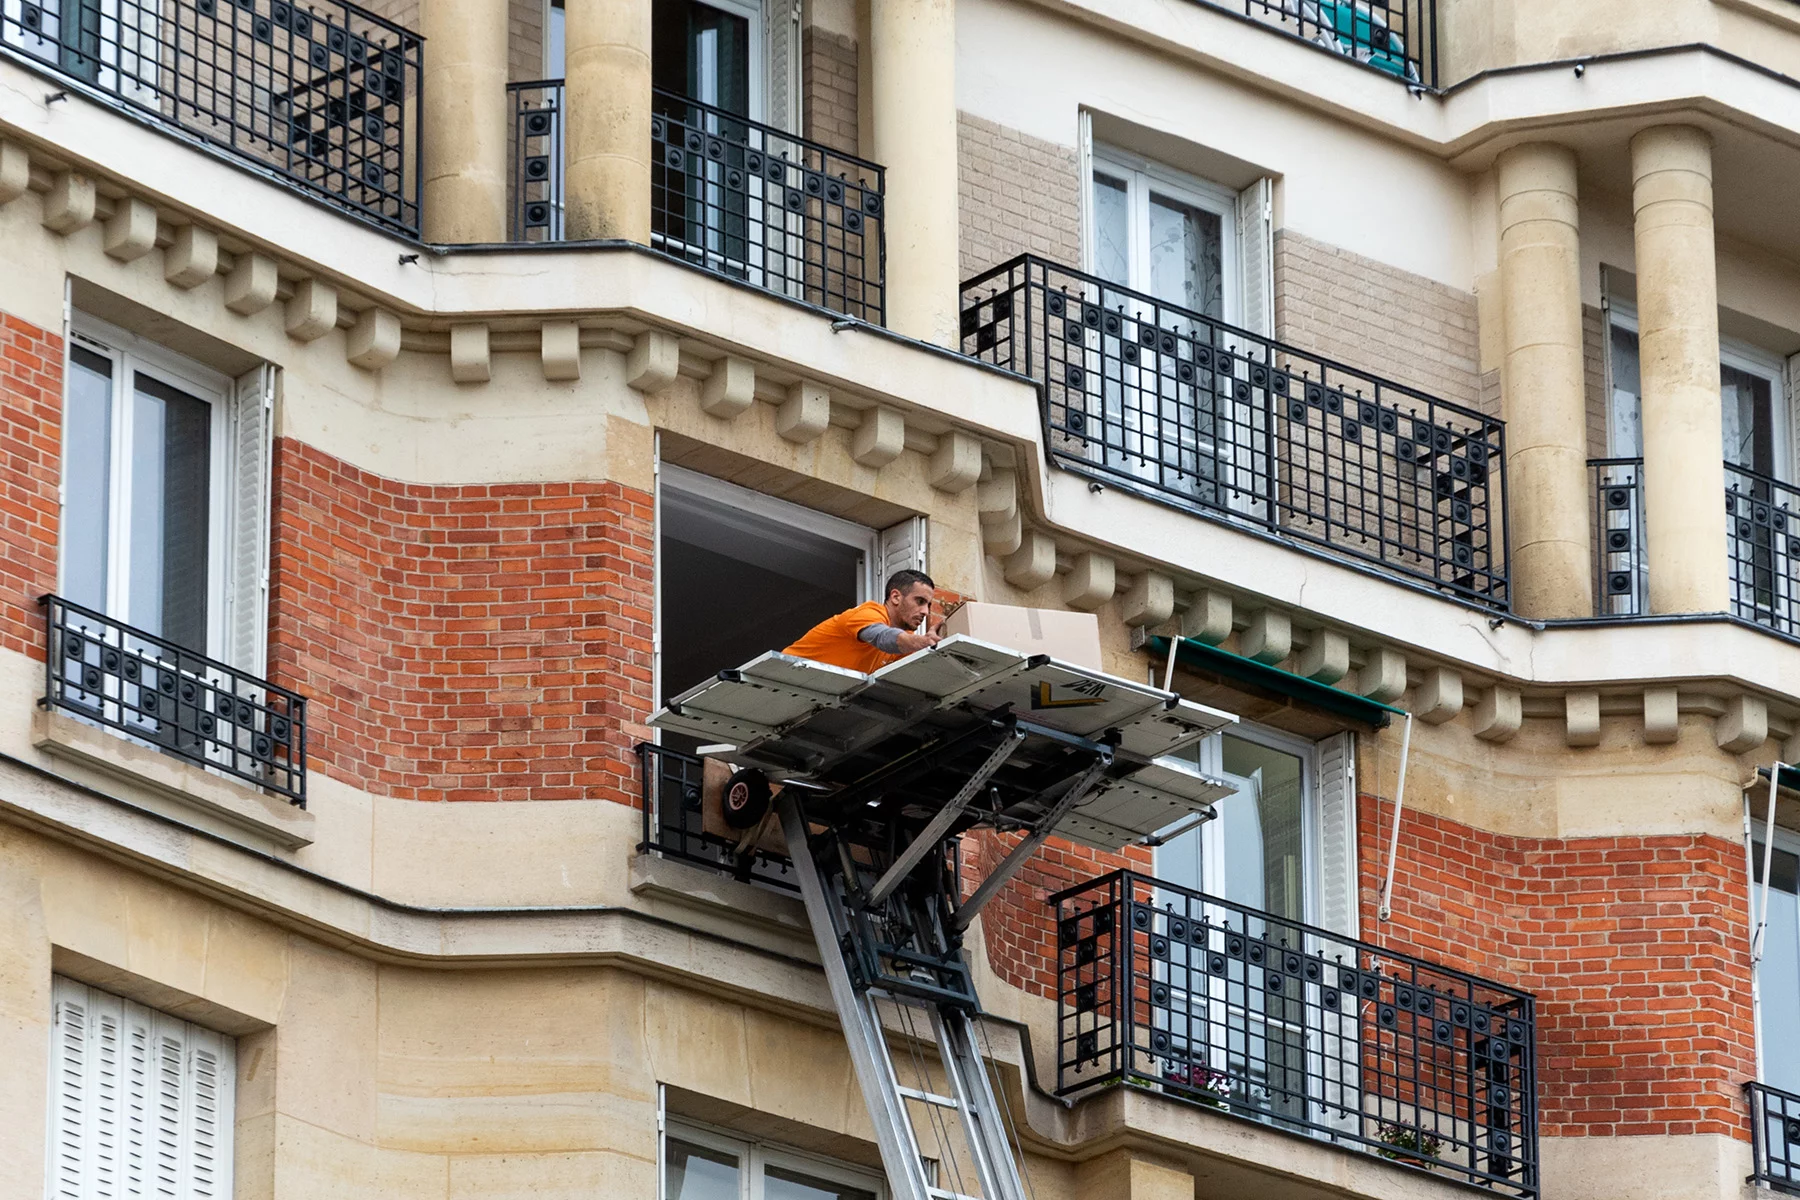 Moving company working at an apartment in Paris